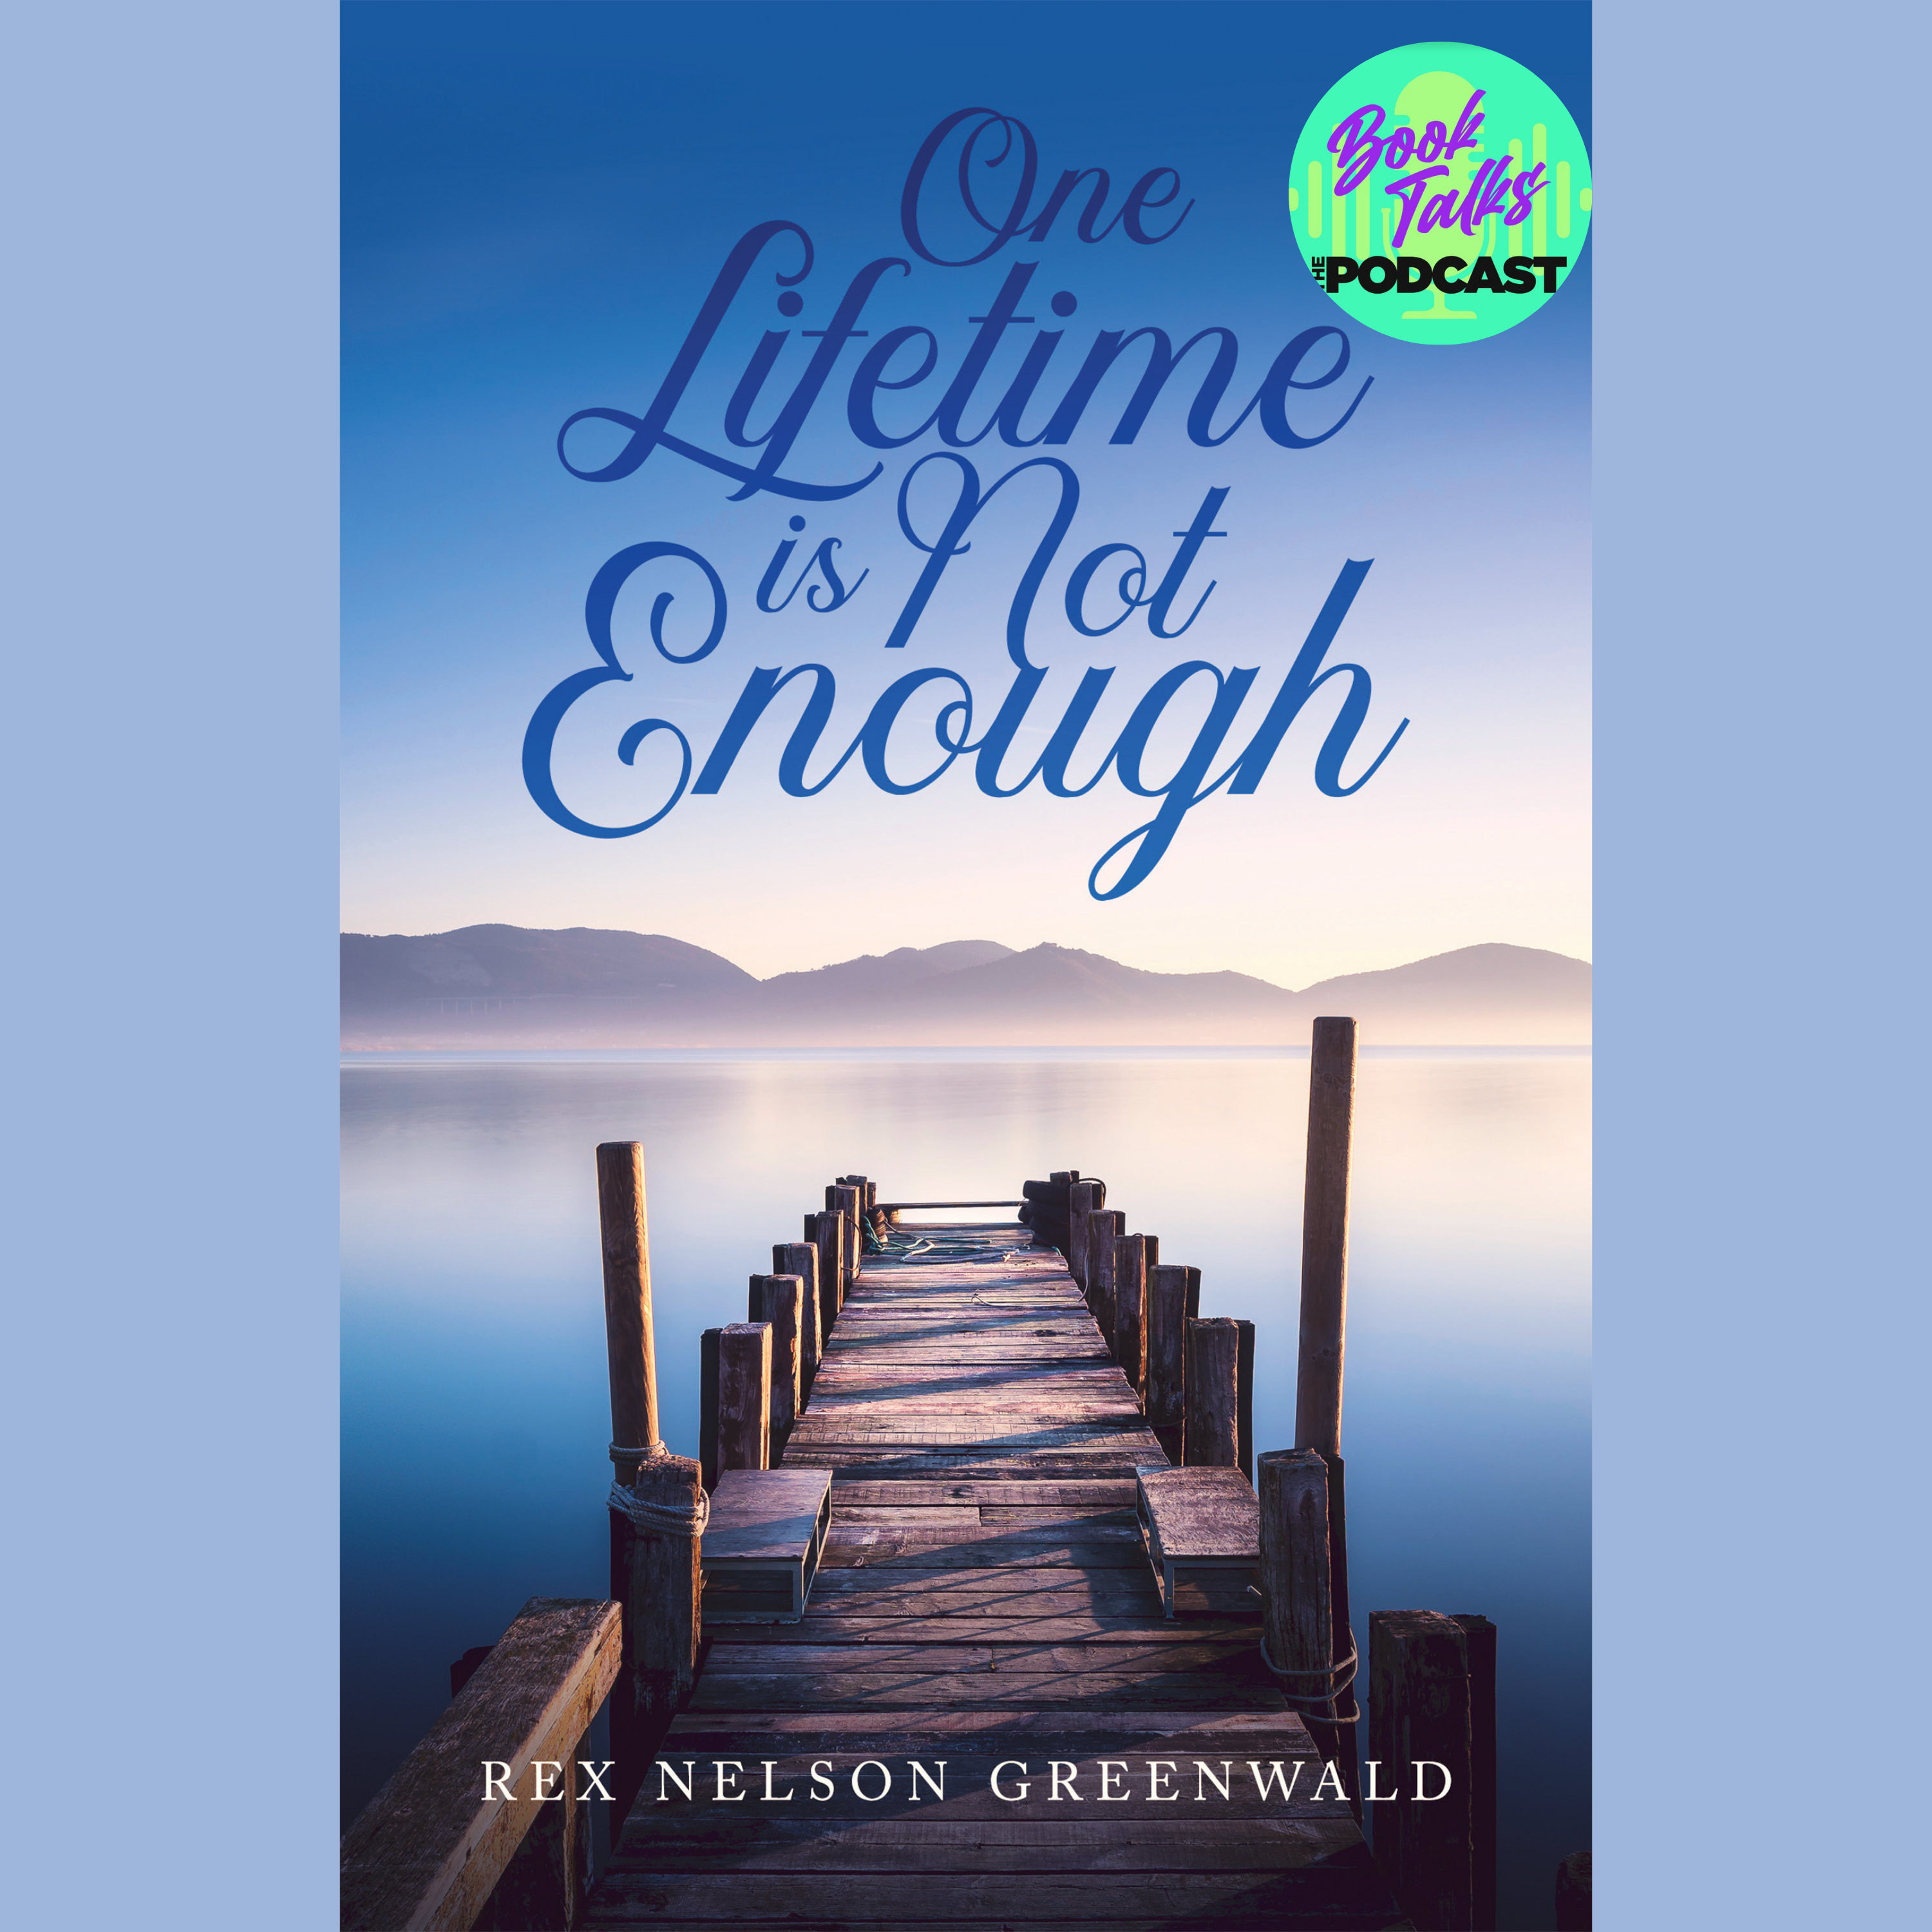 Author of One Lifetime is Not Enough Rex Nelson Greenwald on BookTalks: The Podcast